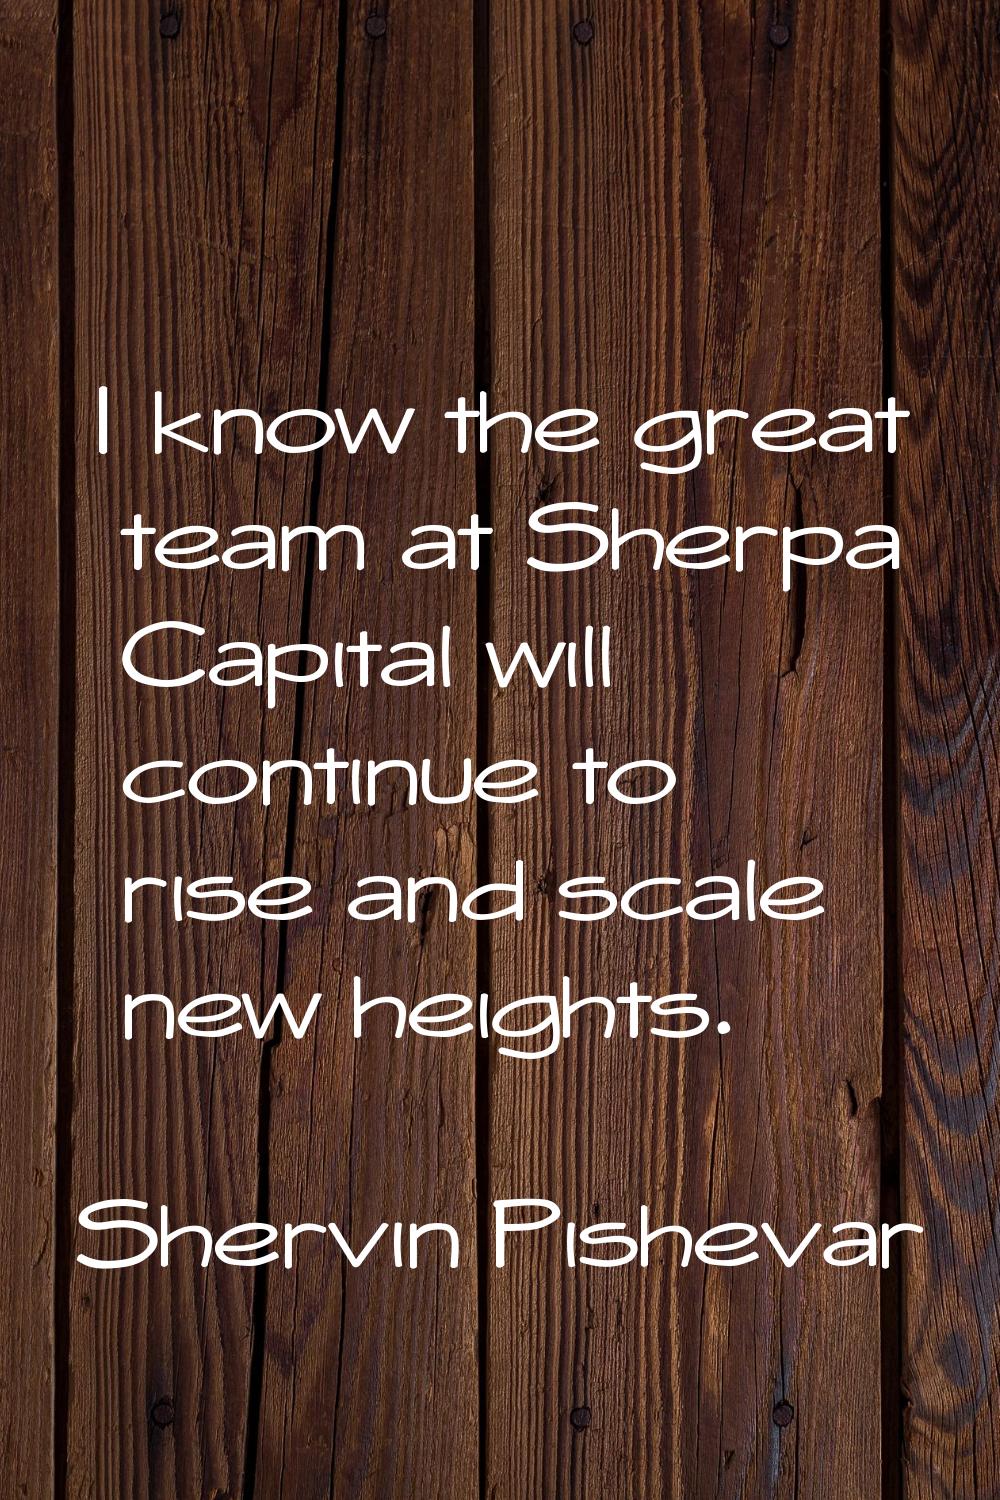 I know the great team at Sherpa Capital will continue to rise and scale new heights.